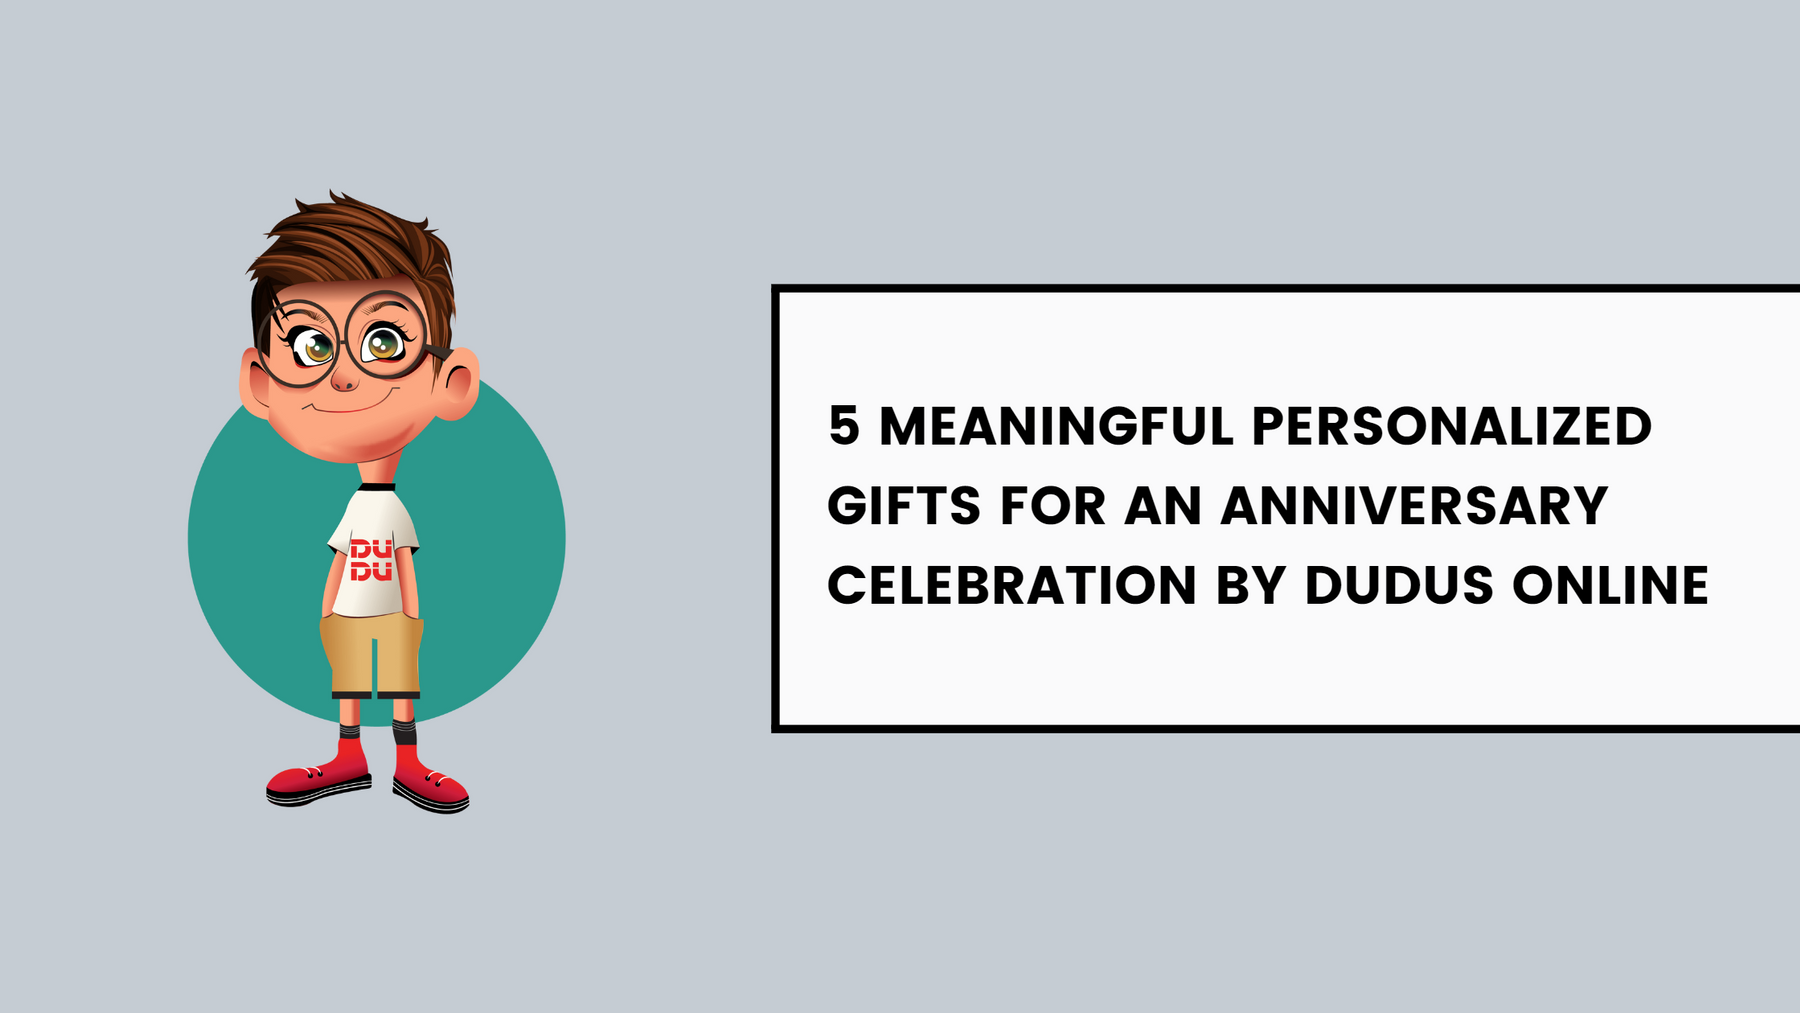 5 Meaningful Personalized Gifts For An Anniversary Celebration By Dudus Online